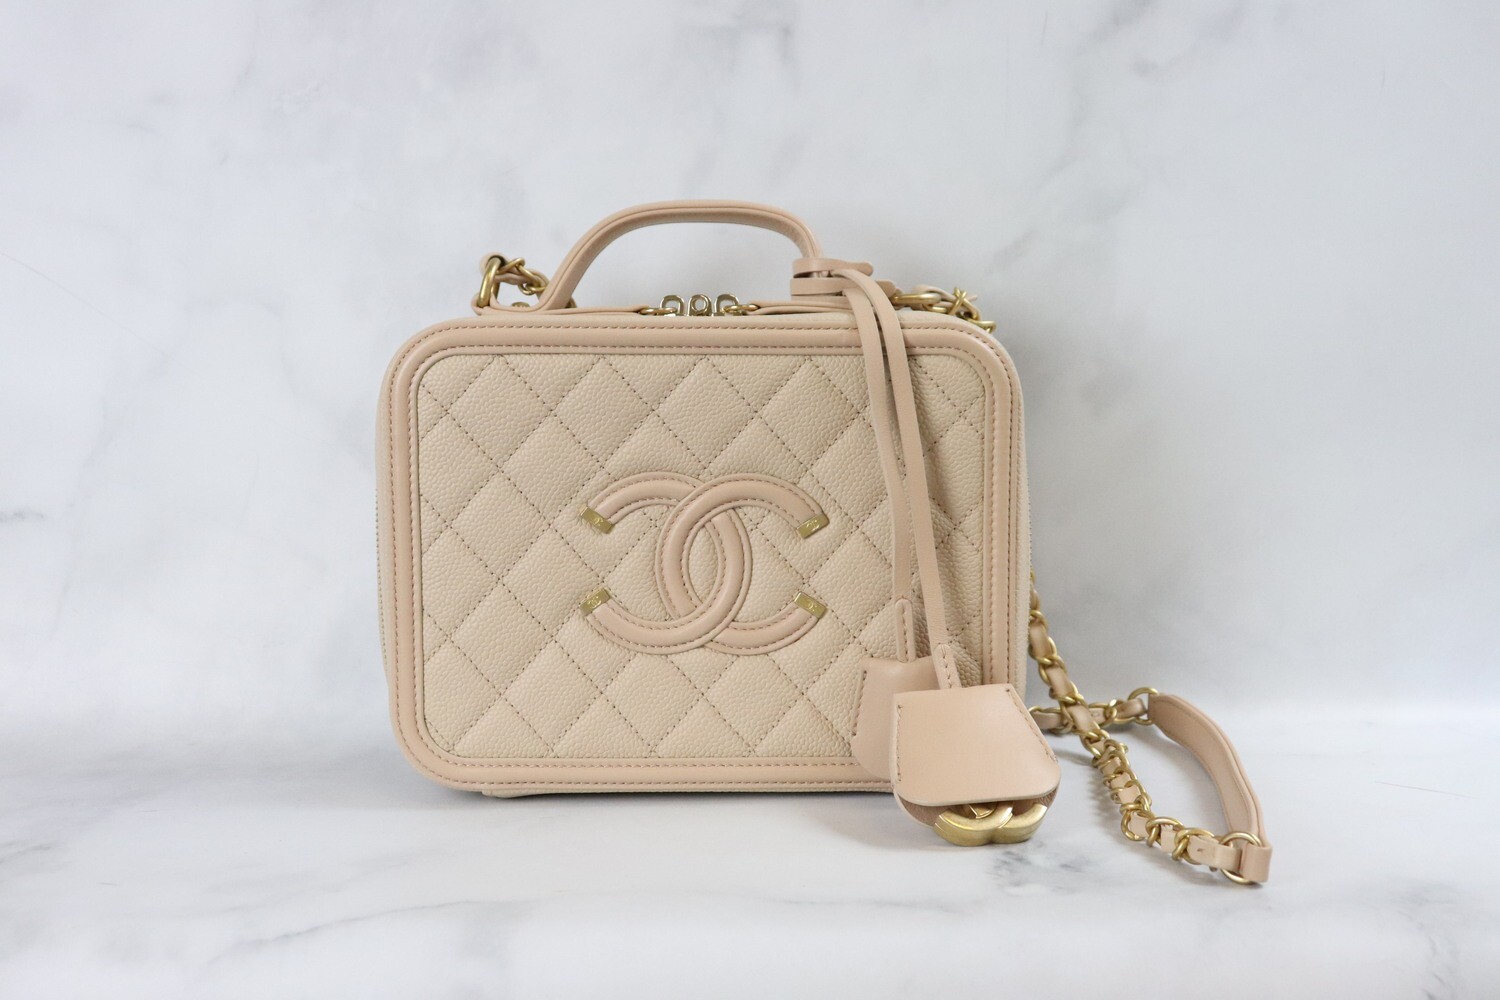 Chanel Vanity Case Review